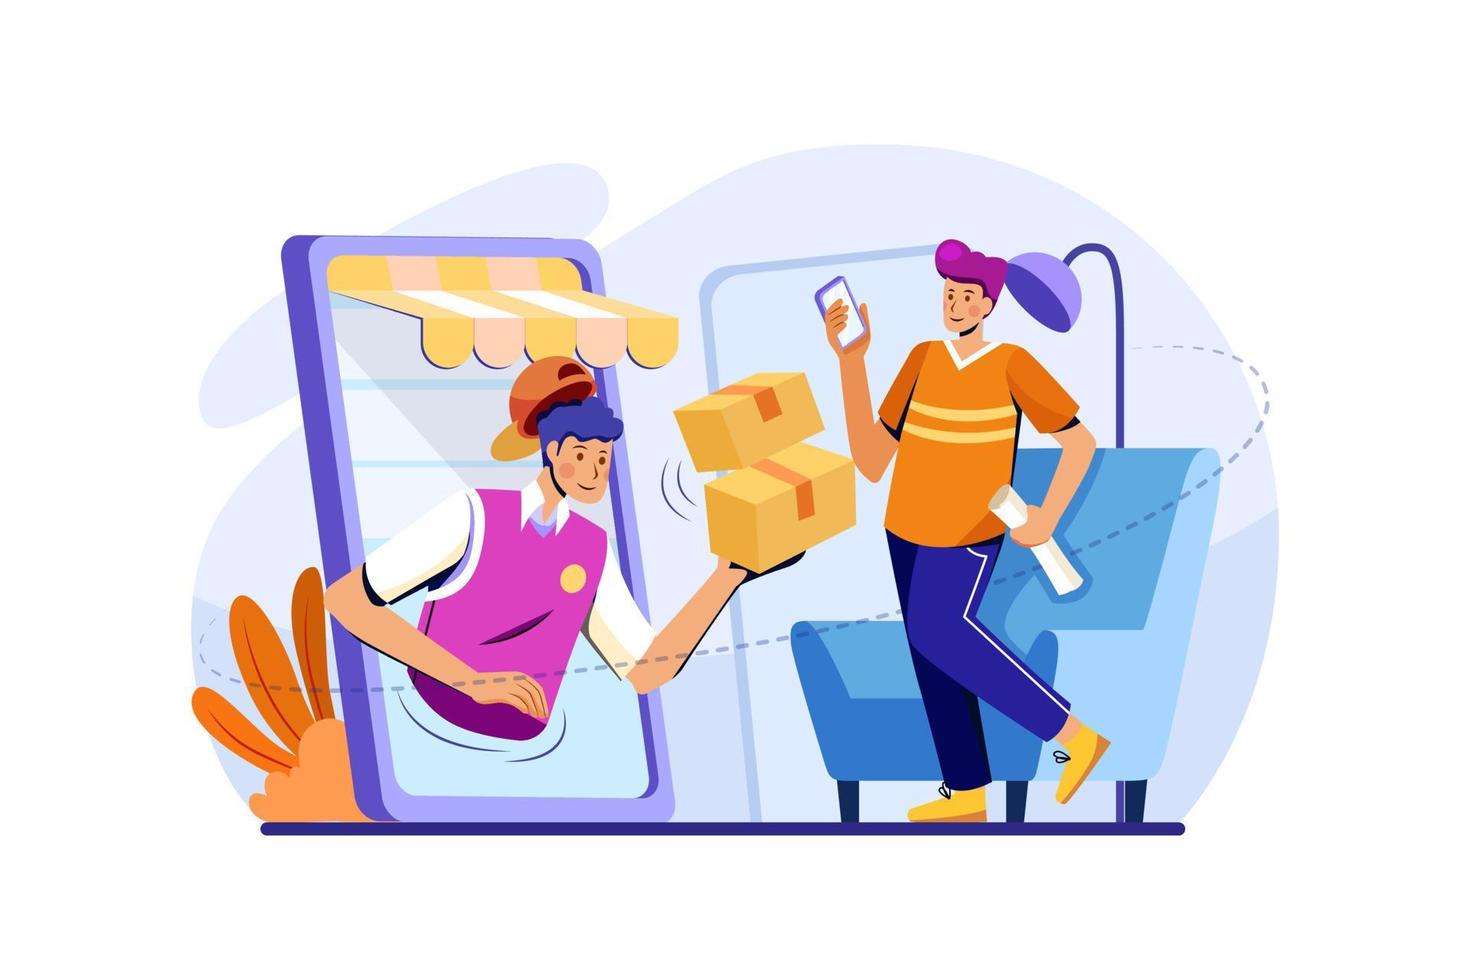 Package Delivery Service Illustration Concept vector